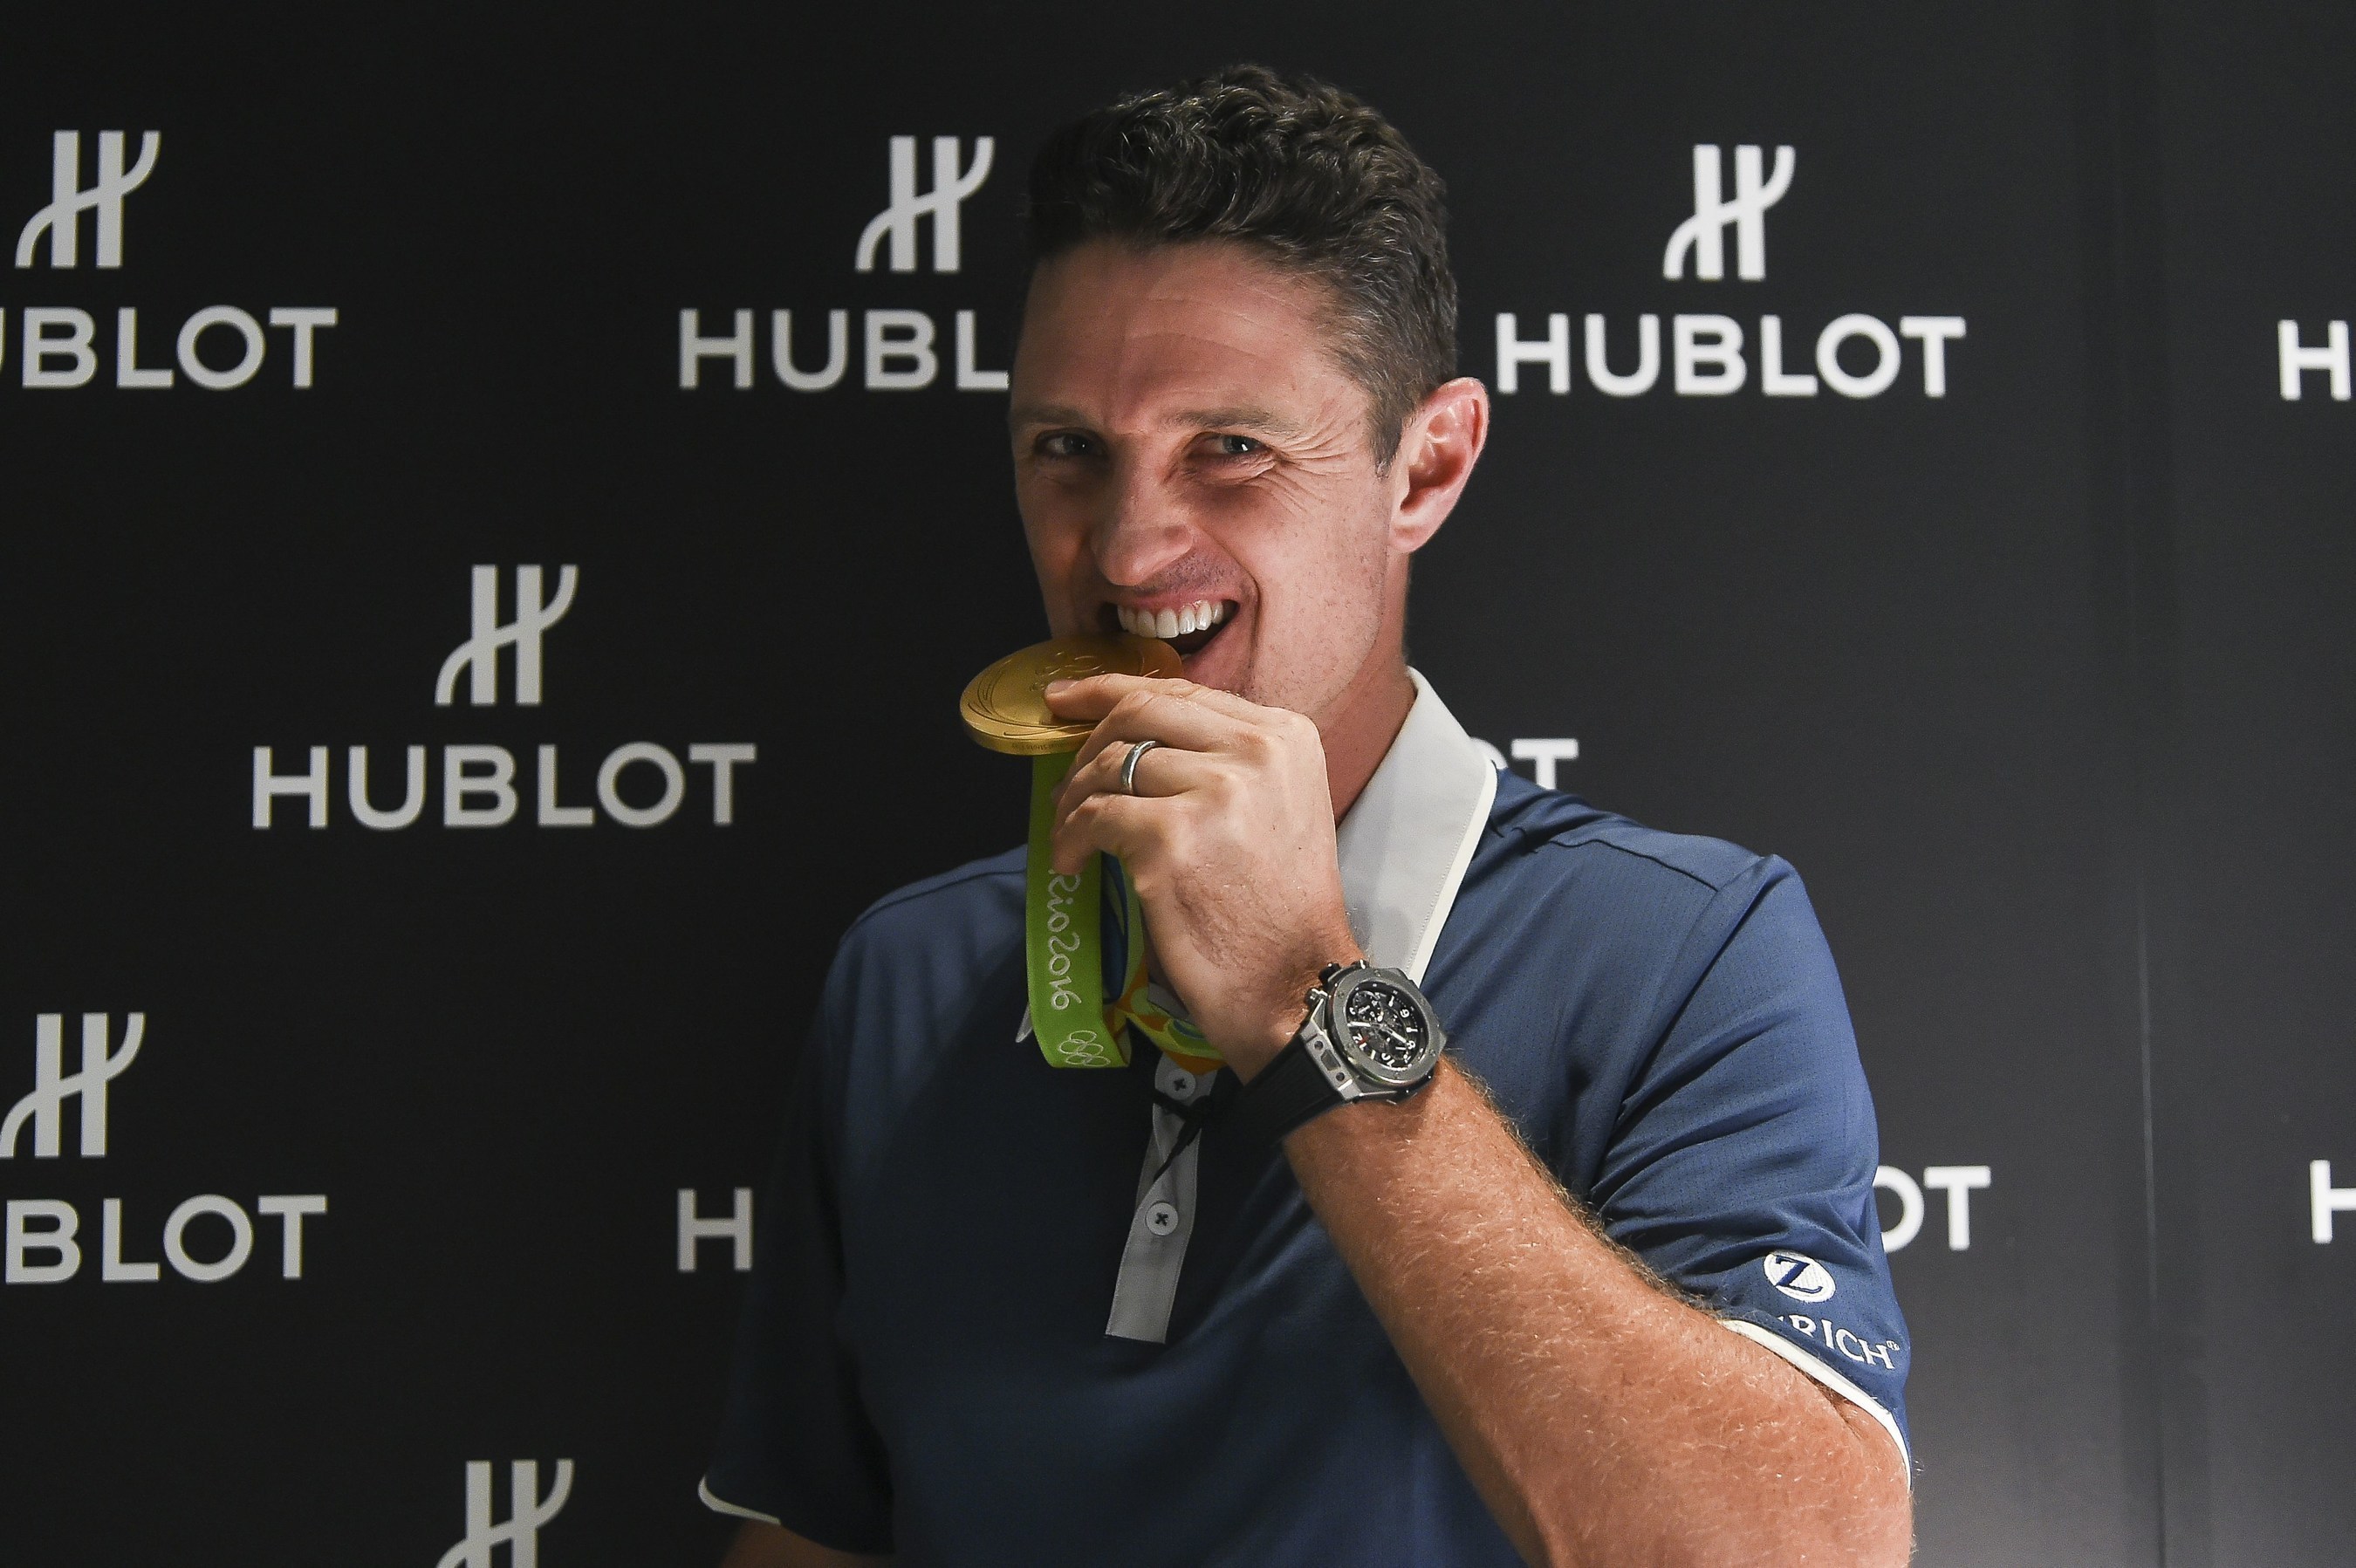 Justin Rose achieved the first Olympic hole in one and is the third Olympic golf champion in history